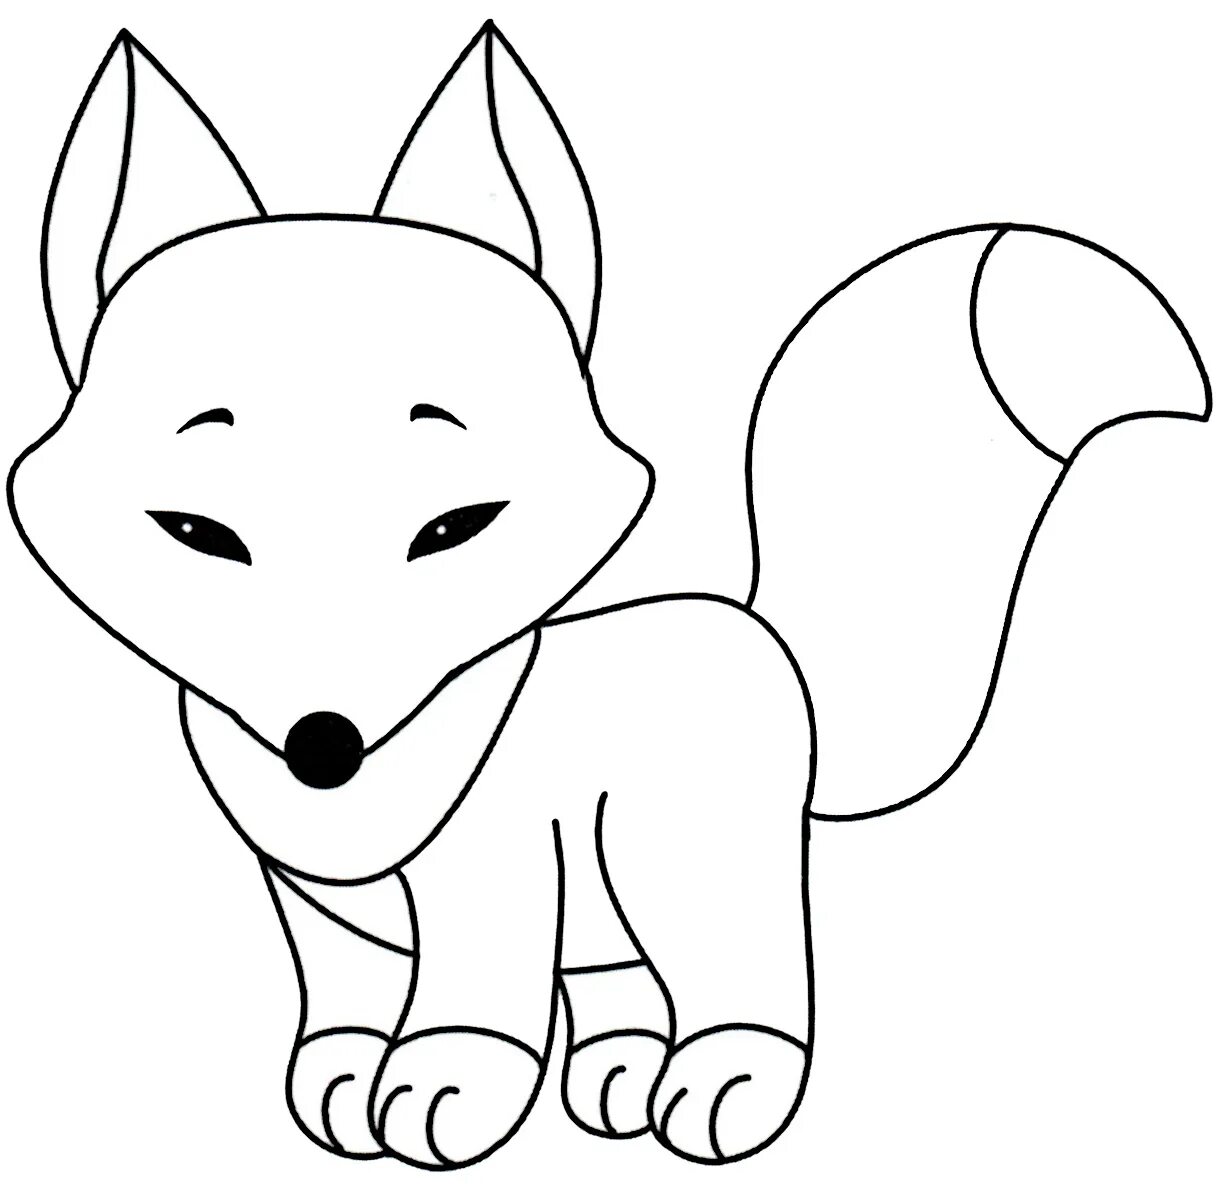 Colorful fox coloring book for kids